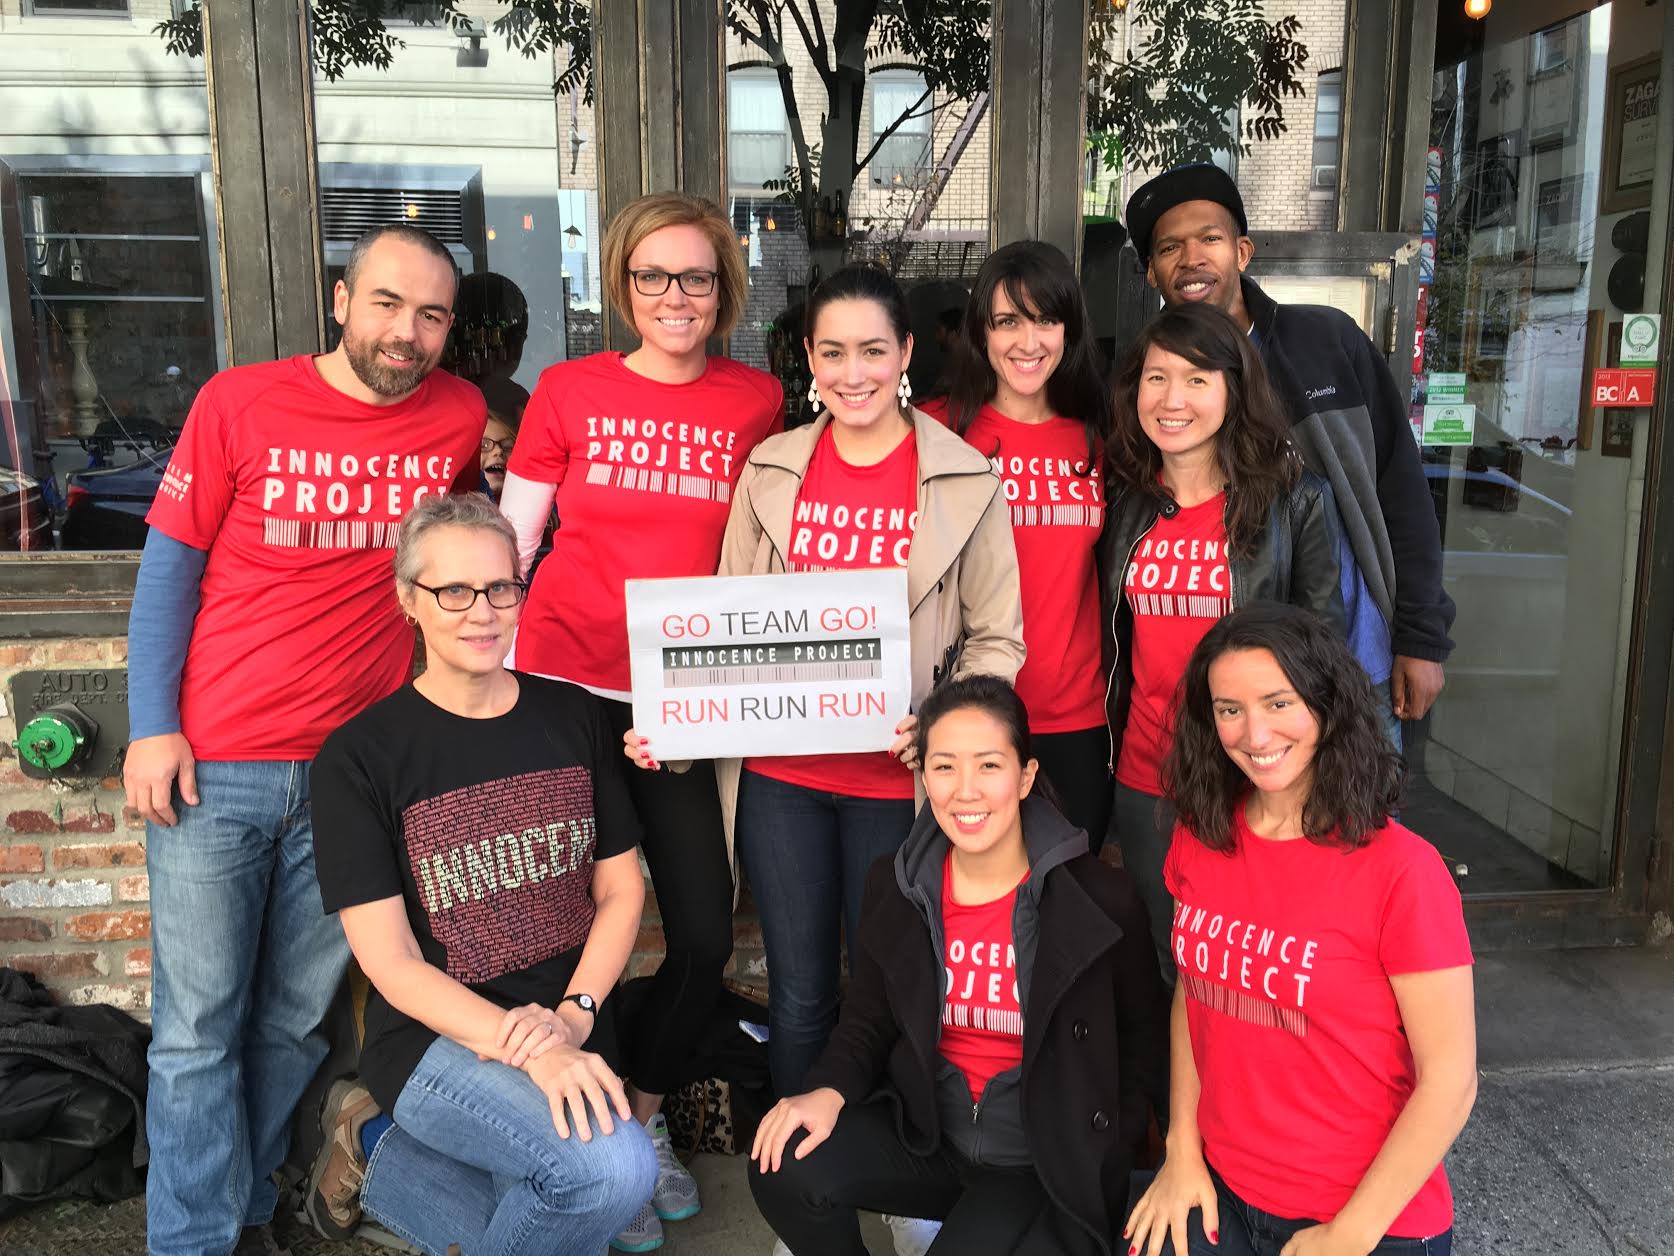 Executive Director, Maddy deLone and IP Staffer Laura Ma (front row left and center) and IP staffer Kareem Belt (top right) pictured here with prior Team Innocence Project TCS Marathon members.